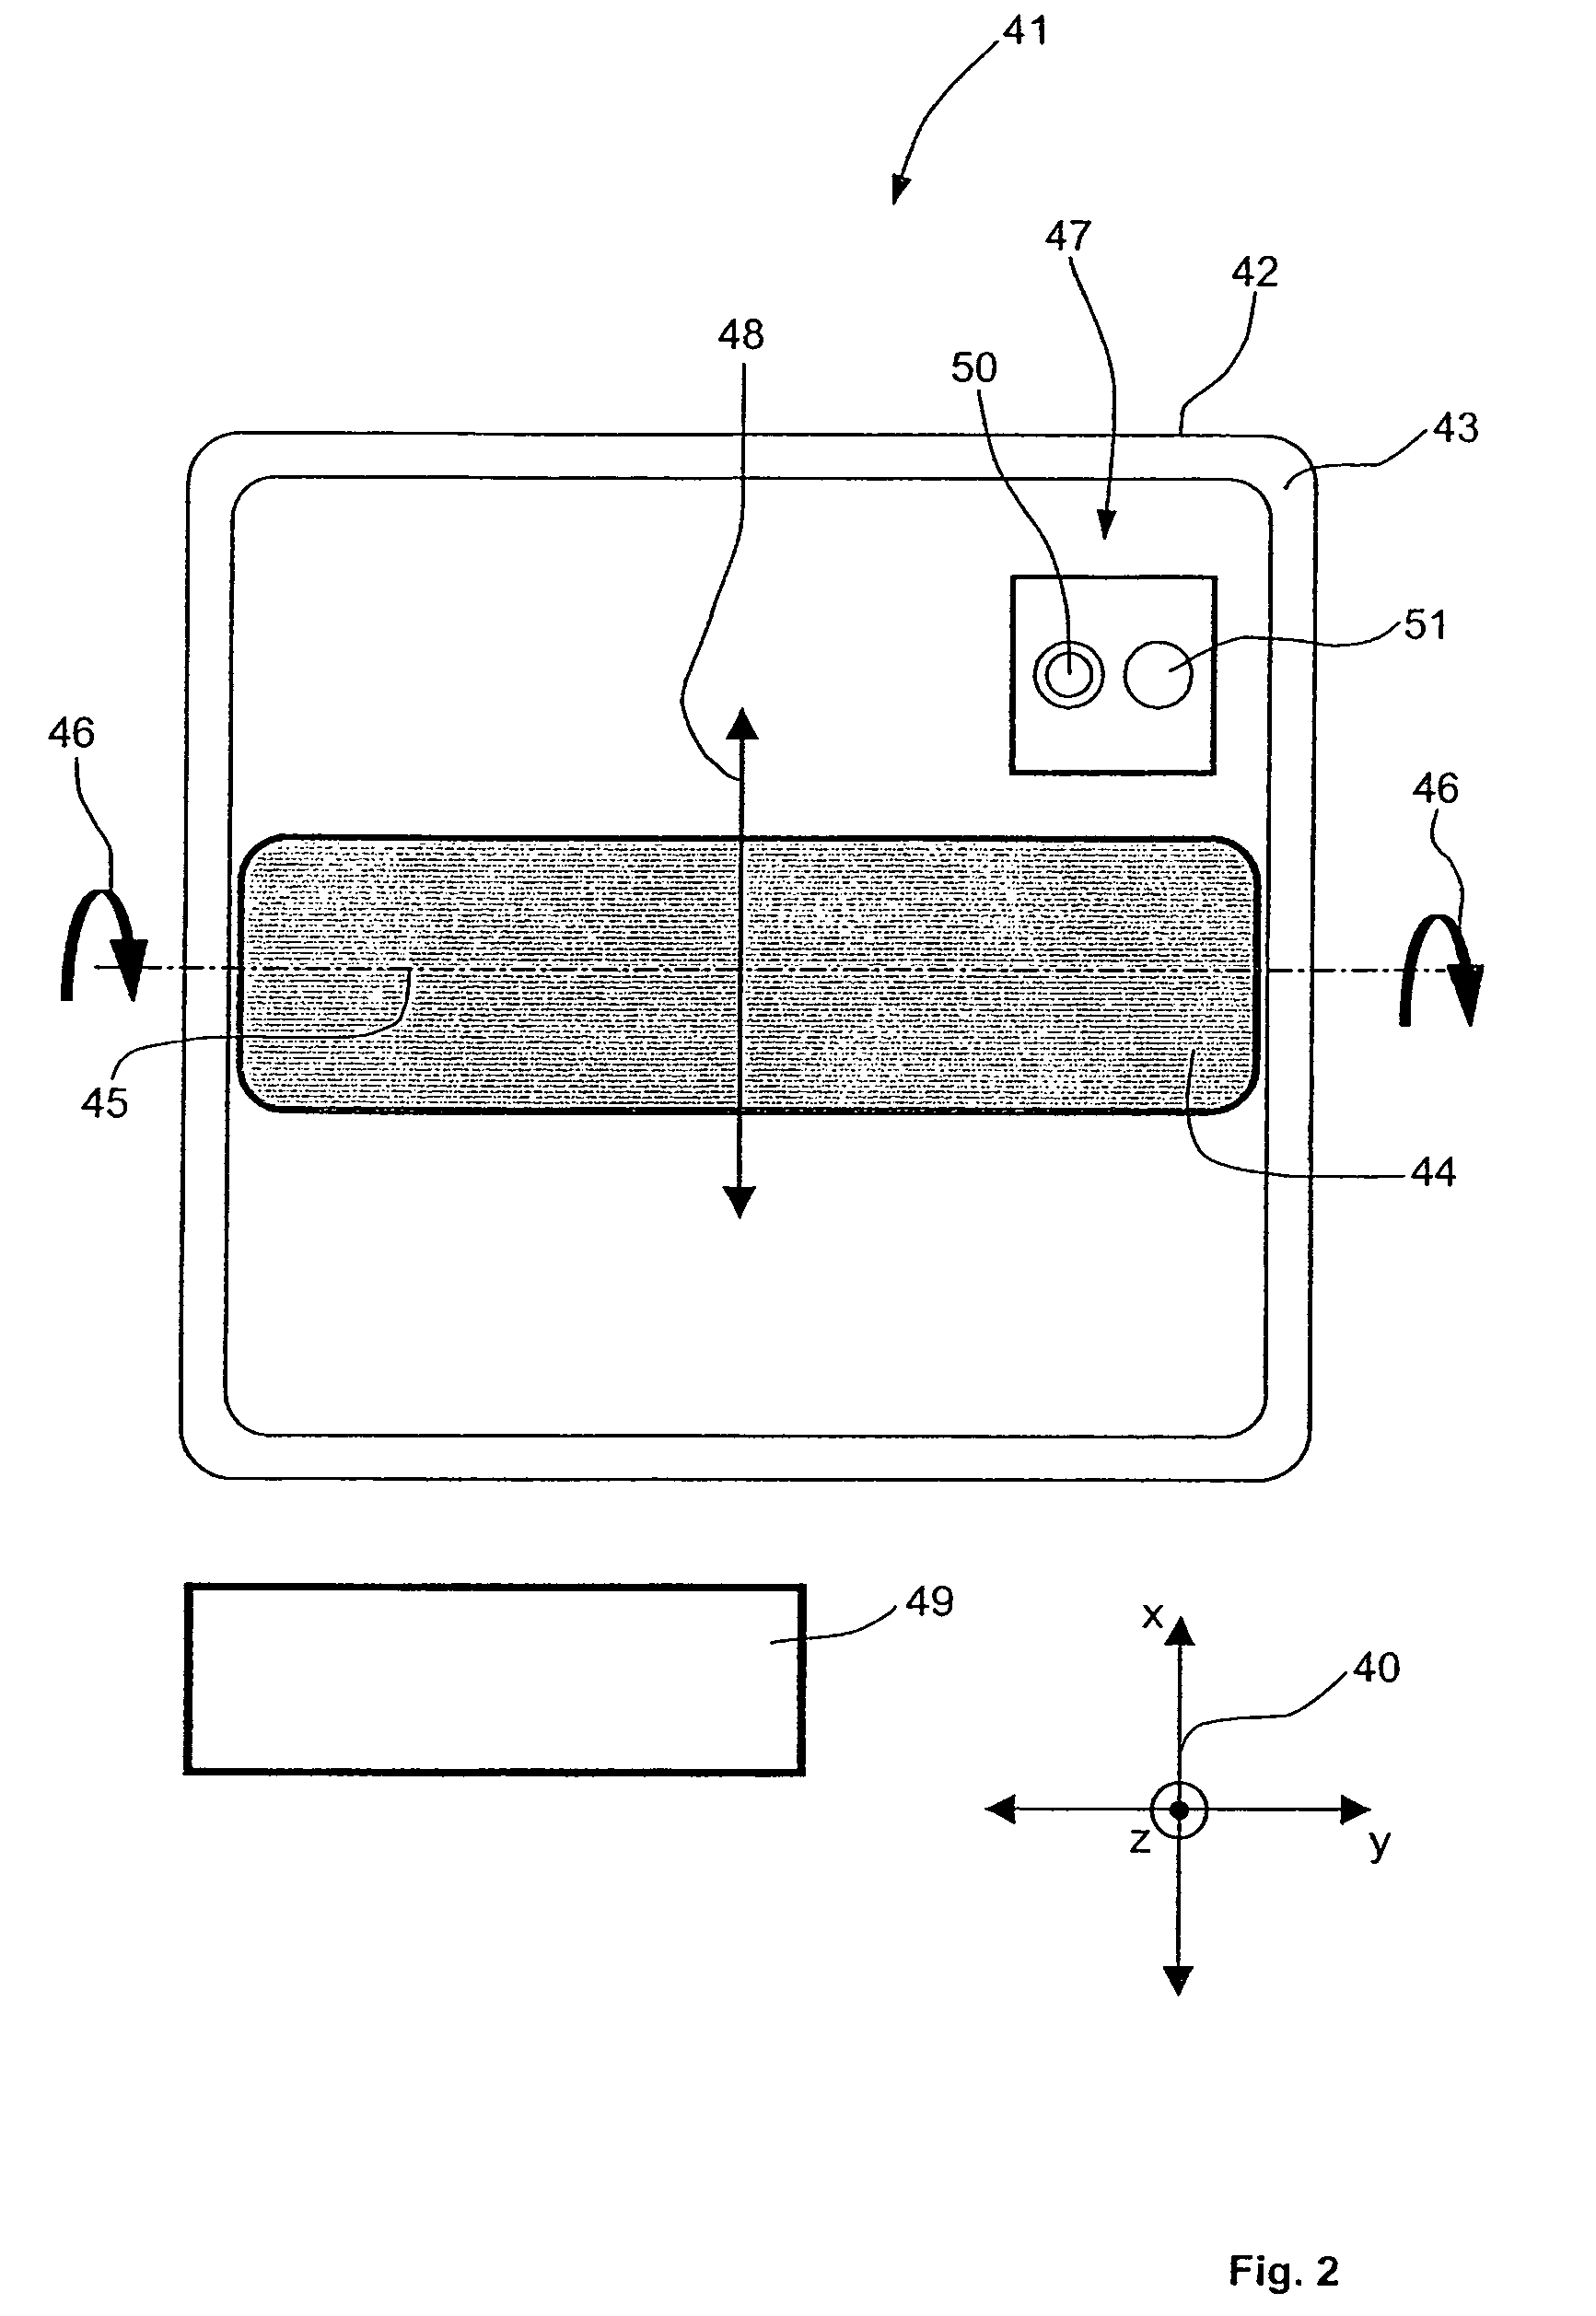 Loading device for the at least partially automated loading and unloading of a cargo hold on transport equipment as well as a conveying system